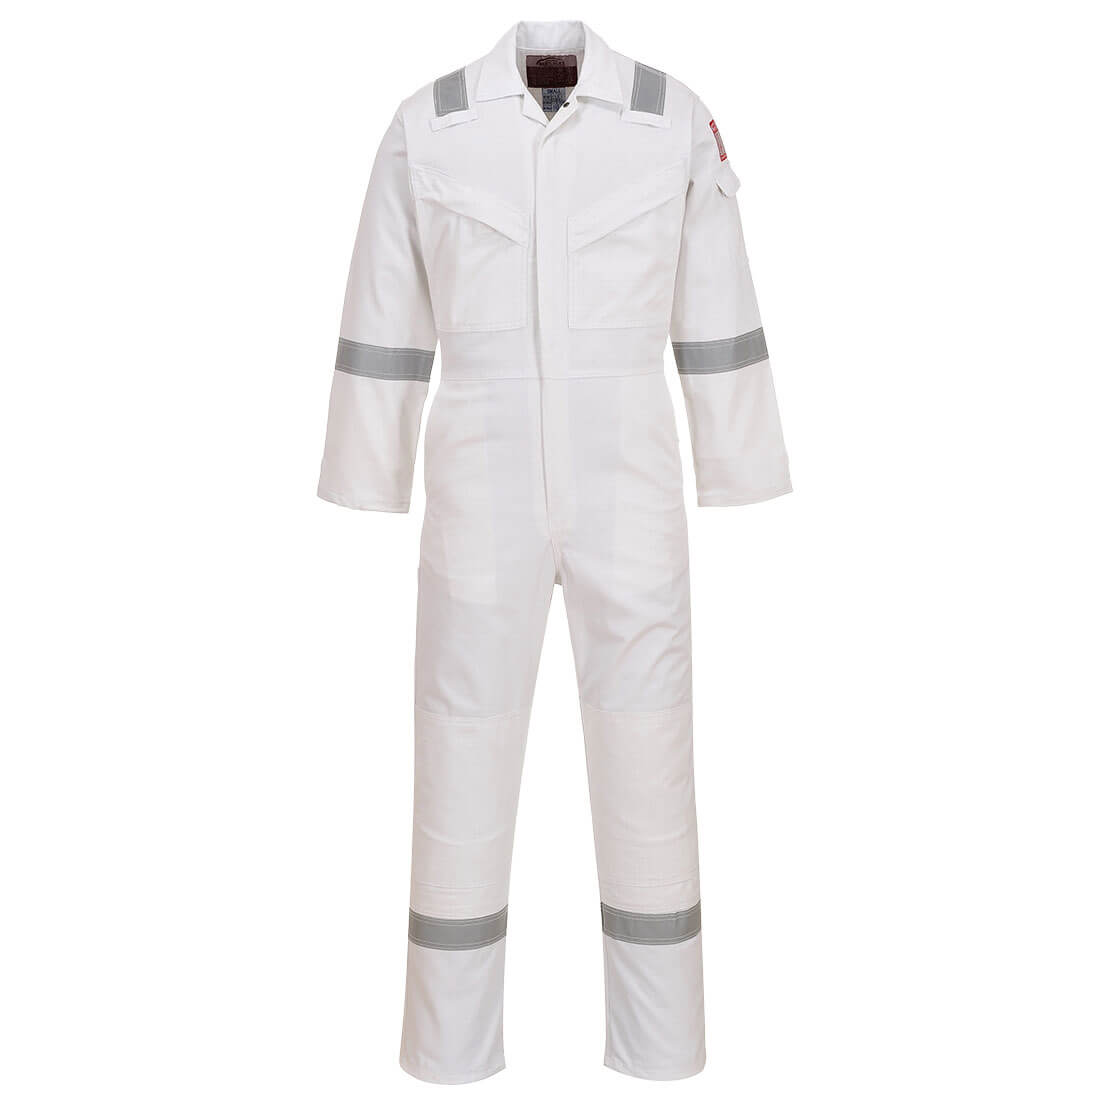 Image of Biz Flame Mens Aberdeen Flame Resistant Antistatic Coverall White S 32"